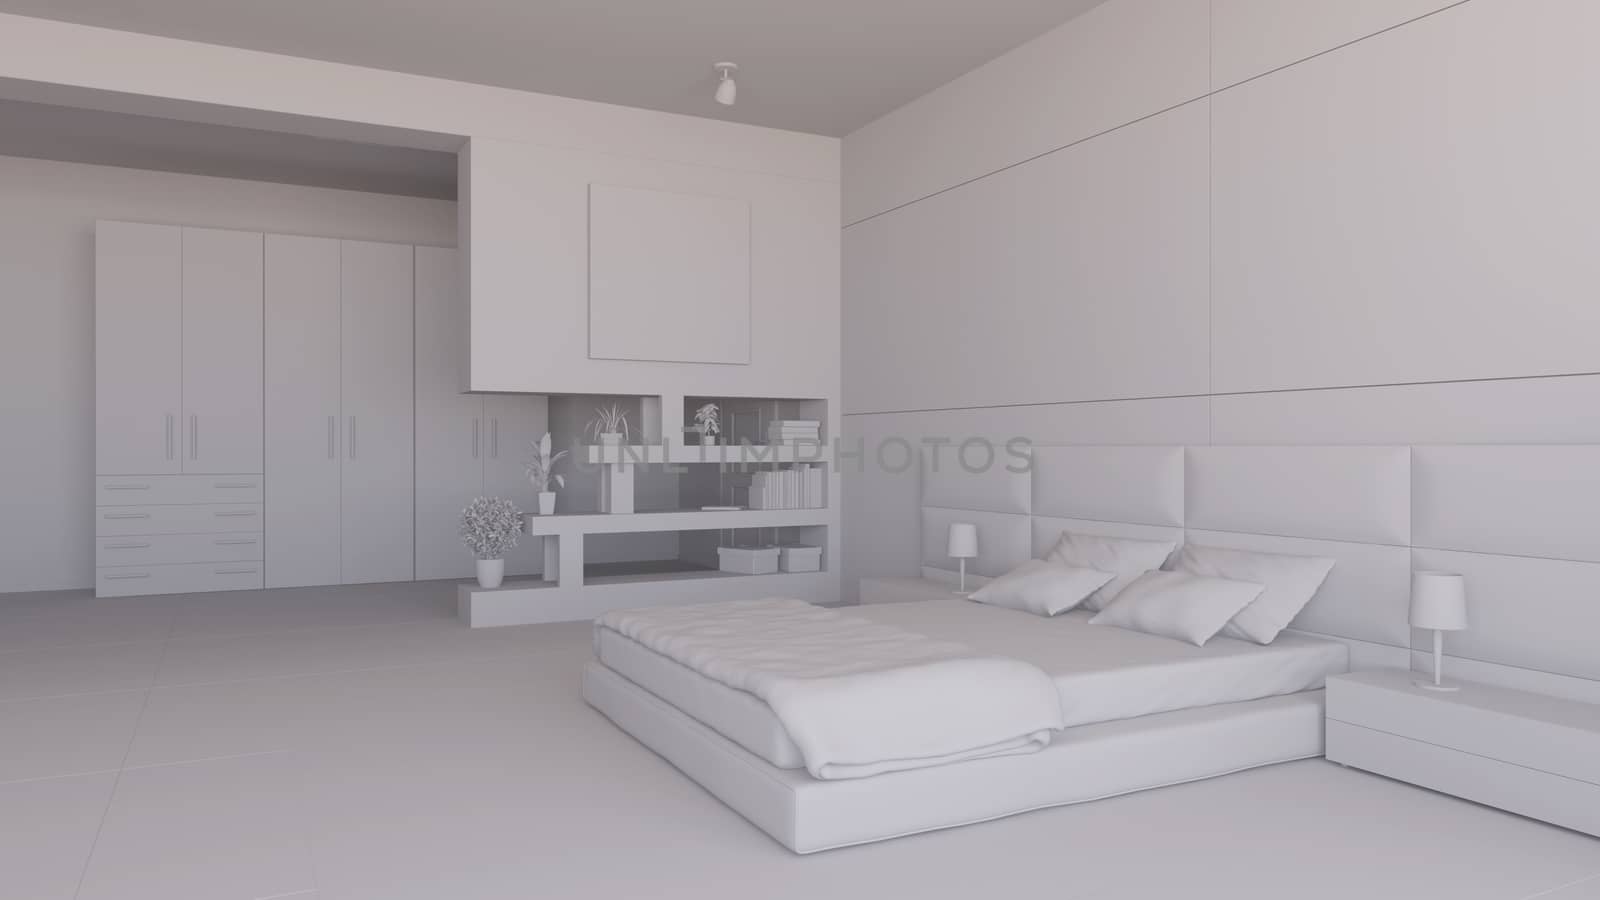 Interior render of a bedroom with some furinitures